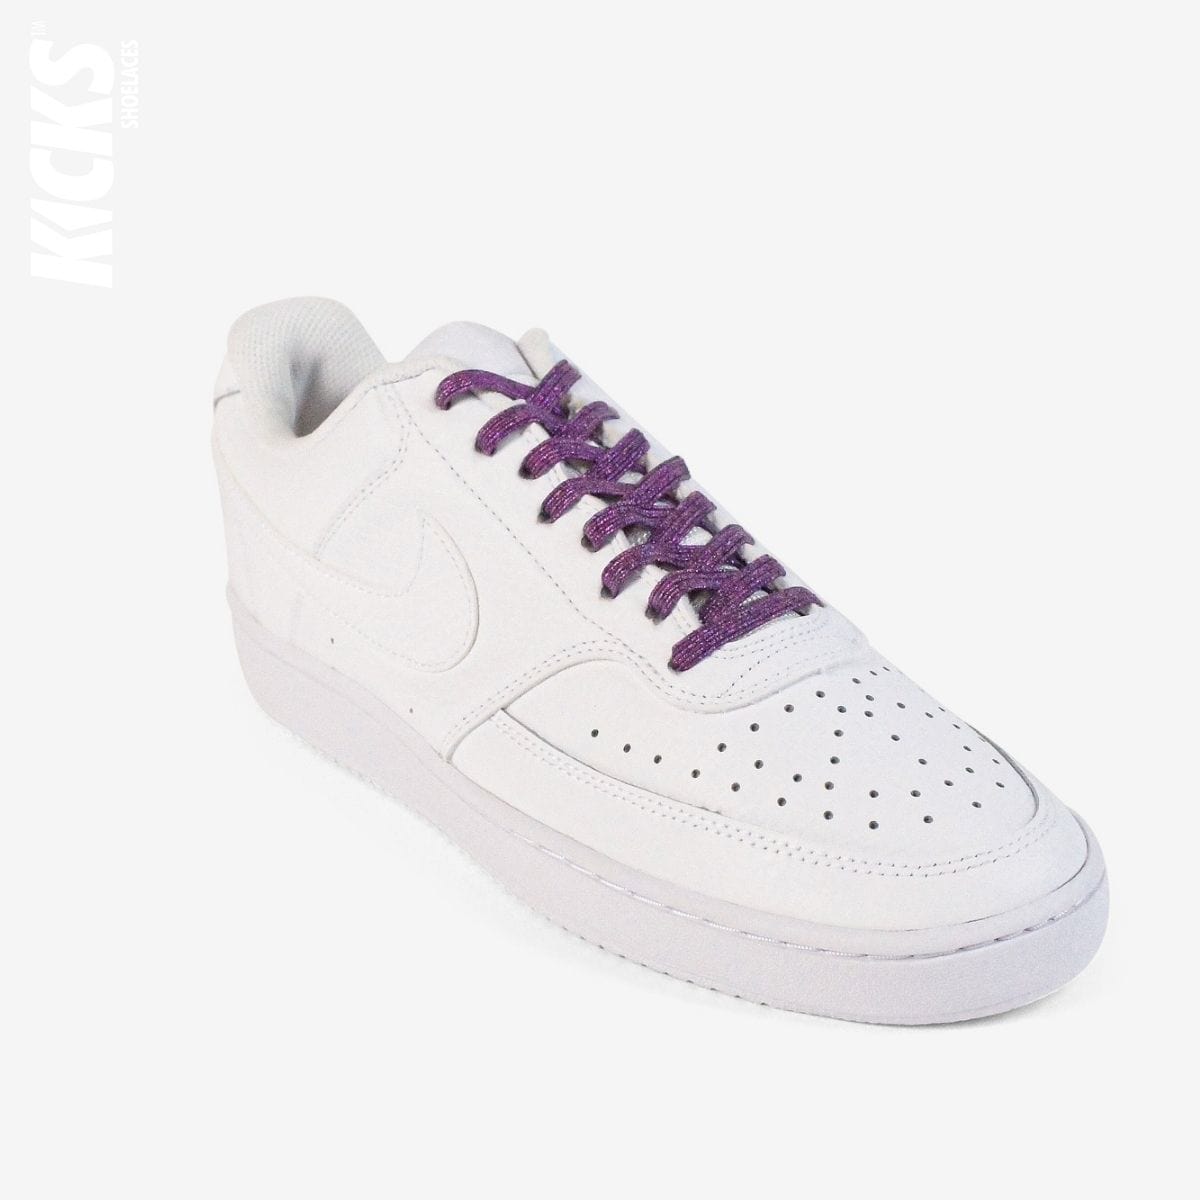 elastic-no-tie-shoelaces-with-purple-laces-on-nike-white-sneakers